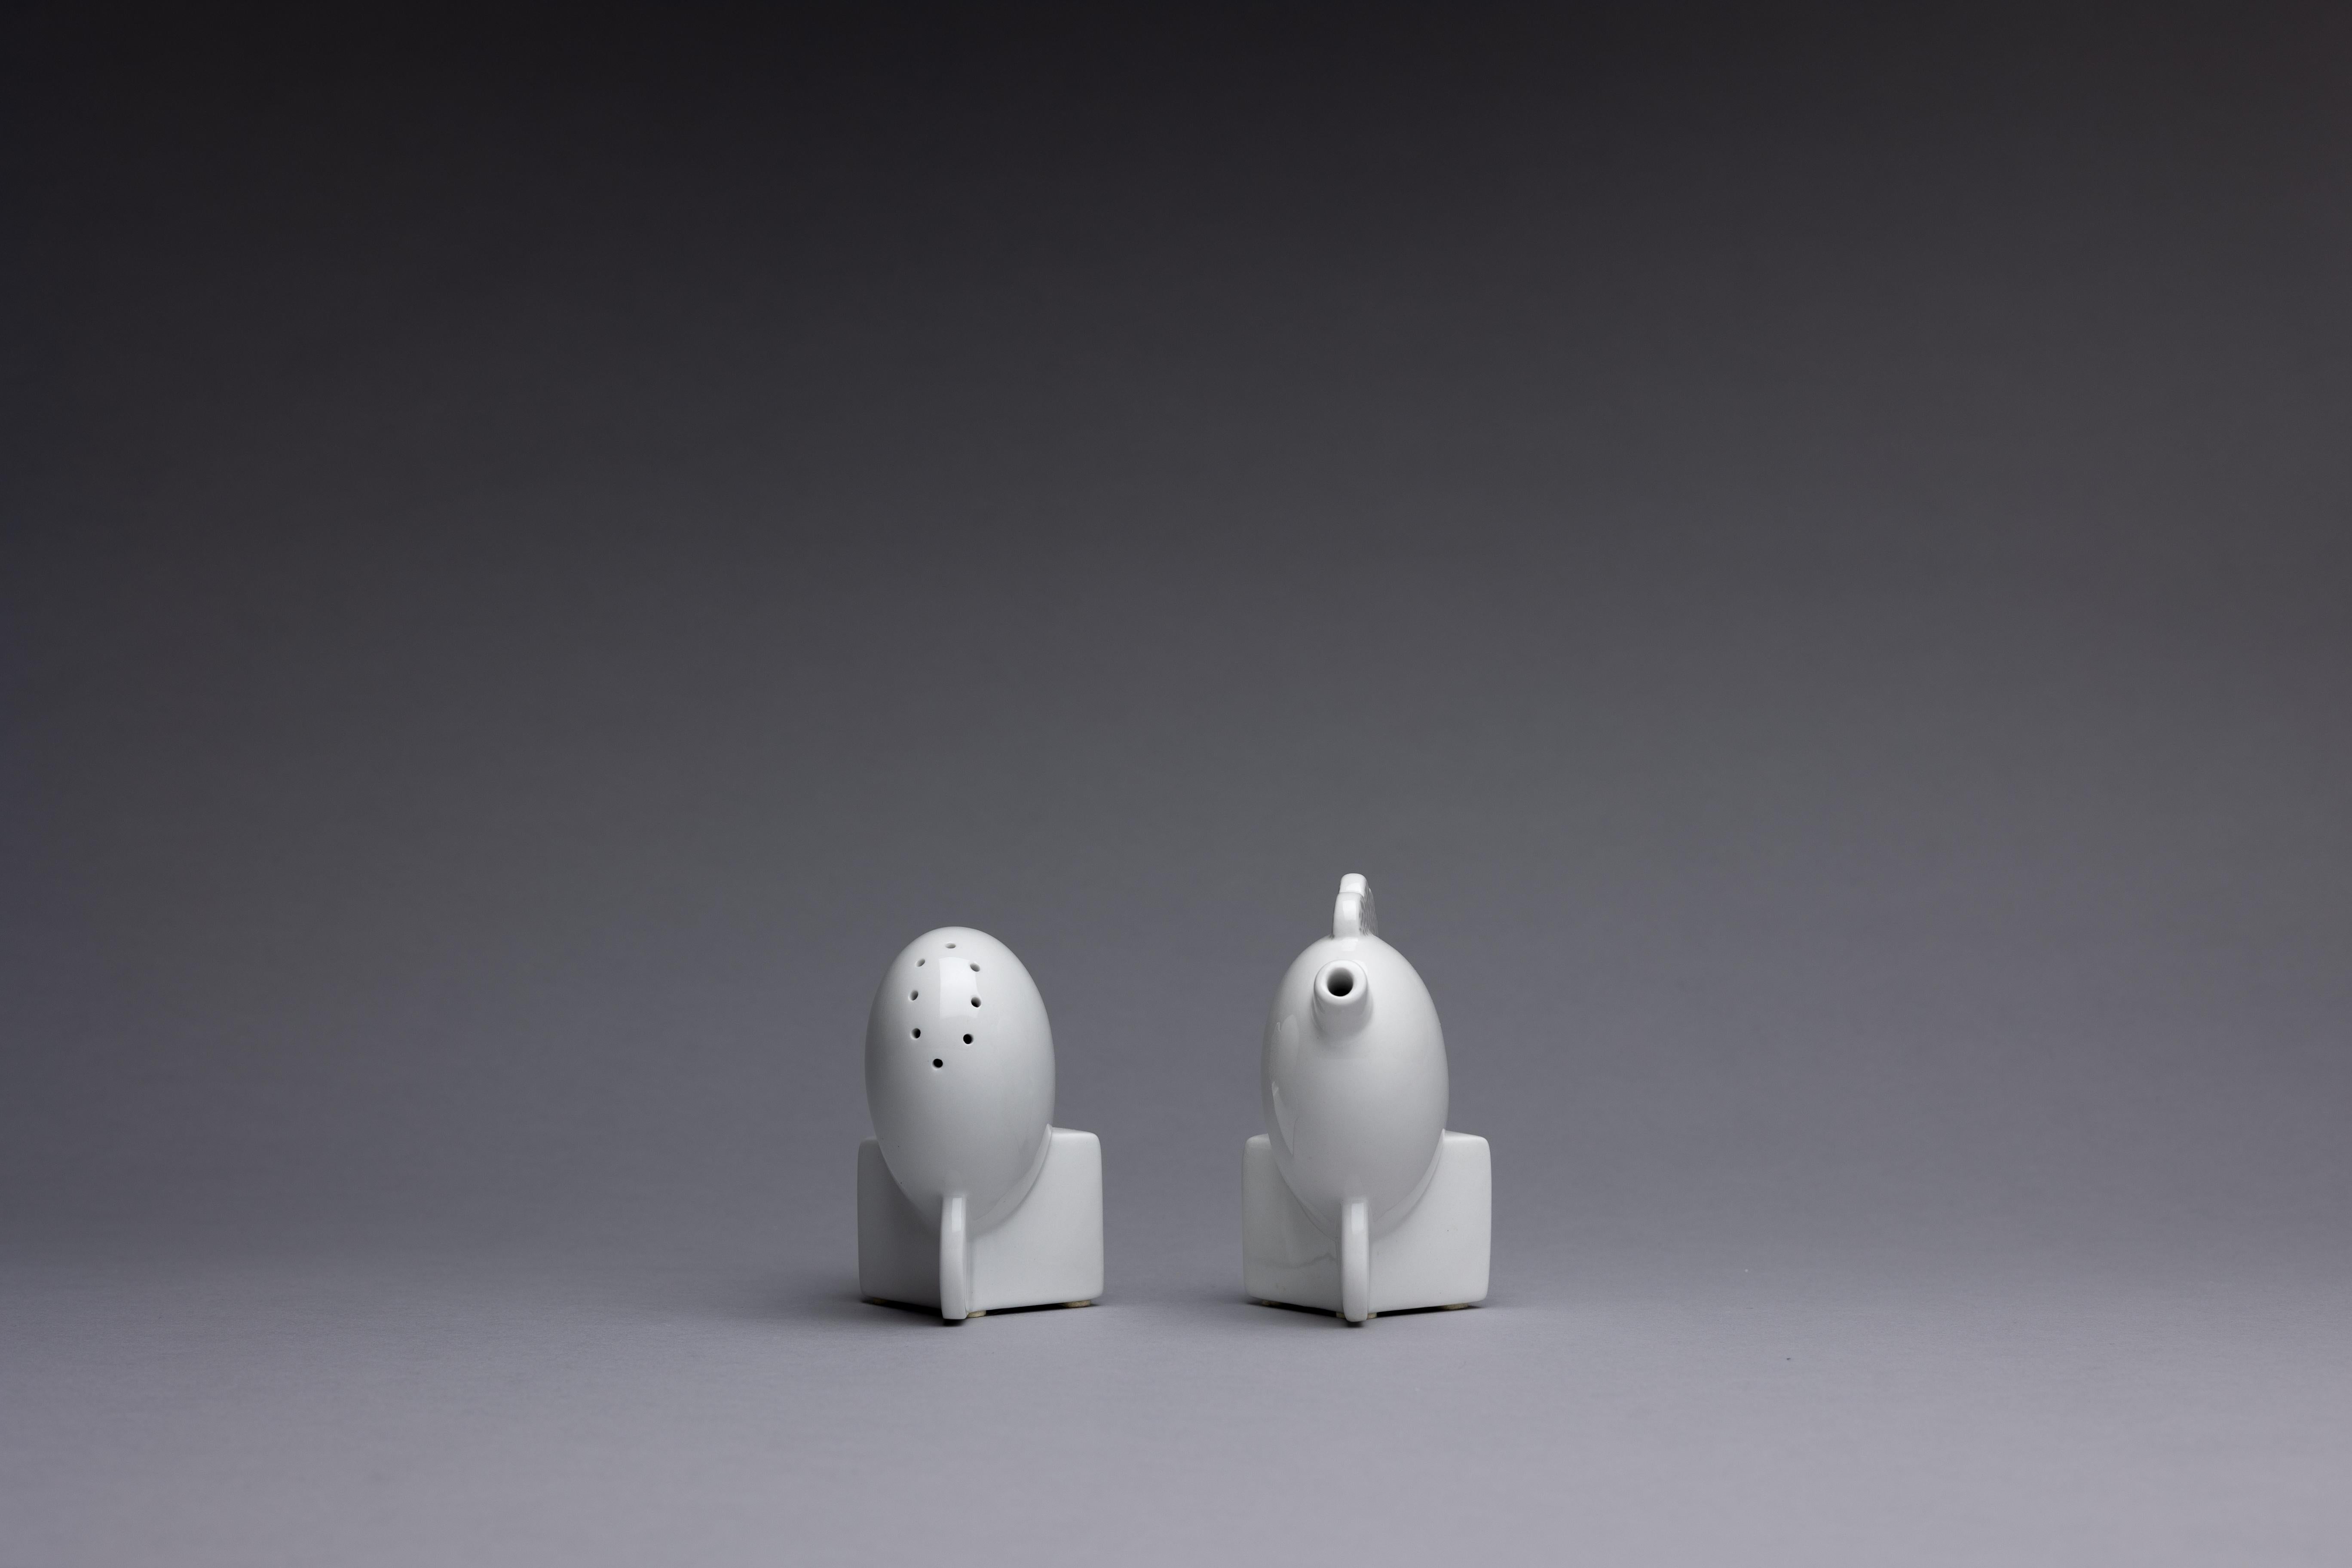 A contemporary manufacture set of porcelain Memphis-style cocktail accessories after designs by Matteo Thun in 1982 for the Memphis group. The pair comprises the 'Michigan' oil holder and the 'Erie' salt shaker.

Memphis Milano formed in the 1980s